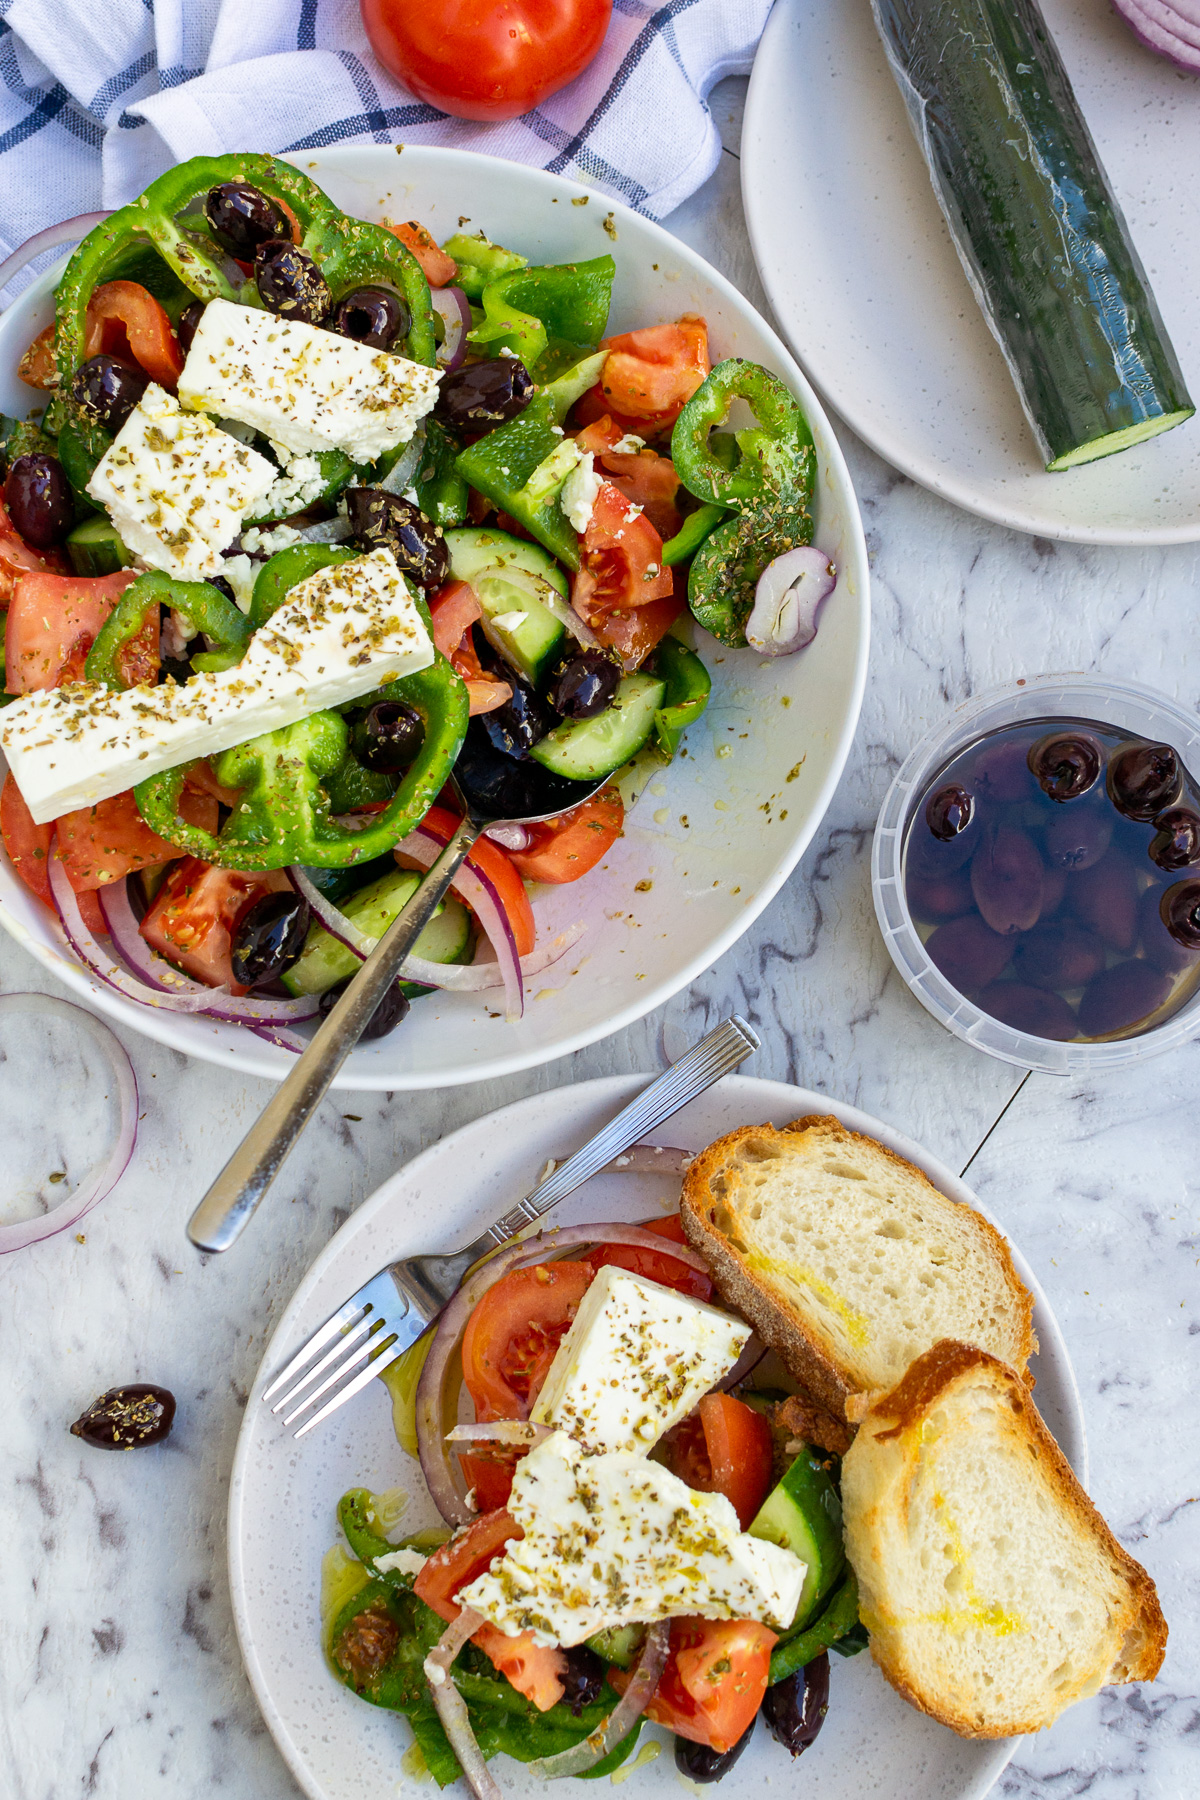 A portion of Greek salad on a plate and the rest of the salad in a bowl from above on a marble background.